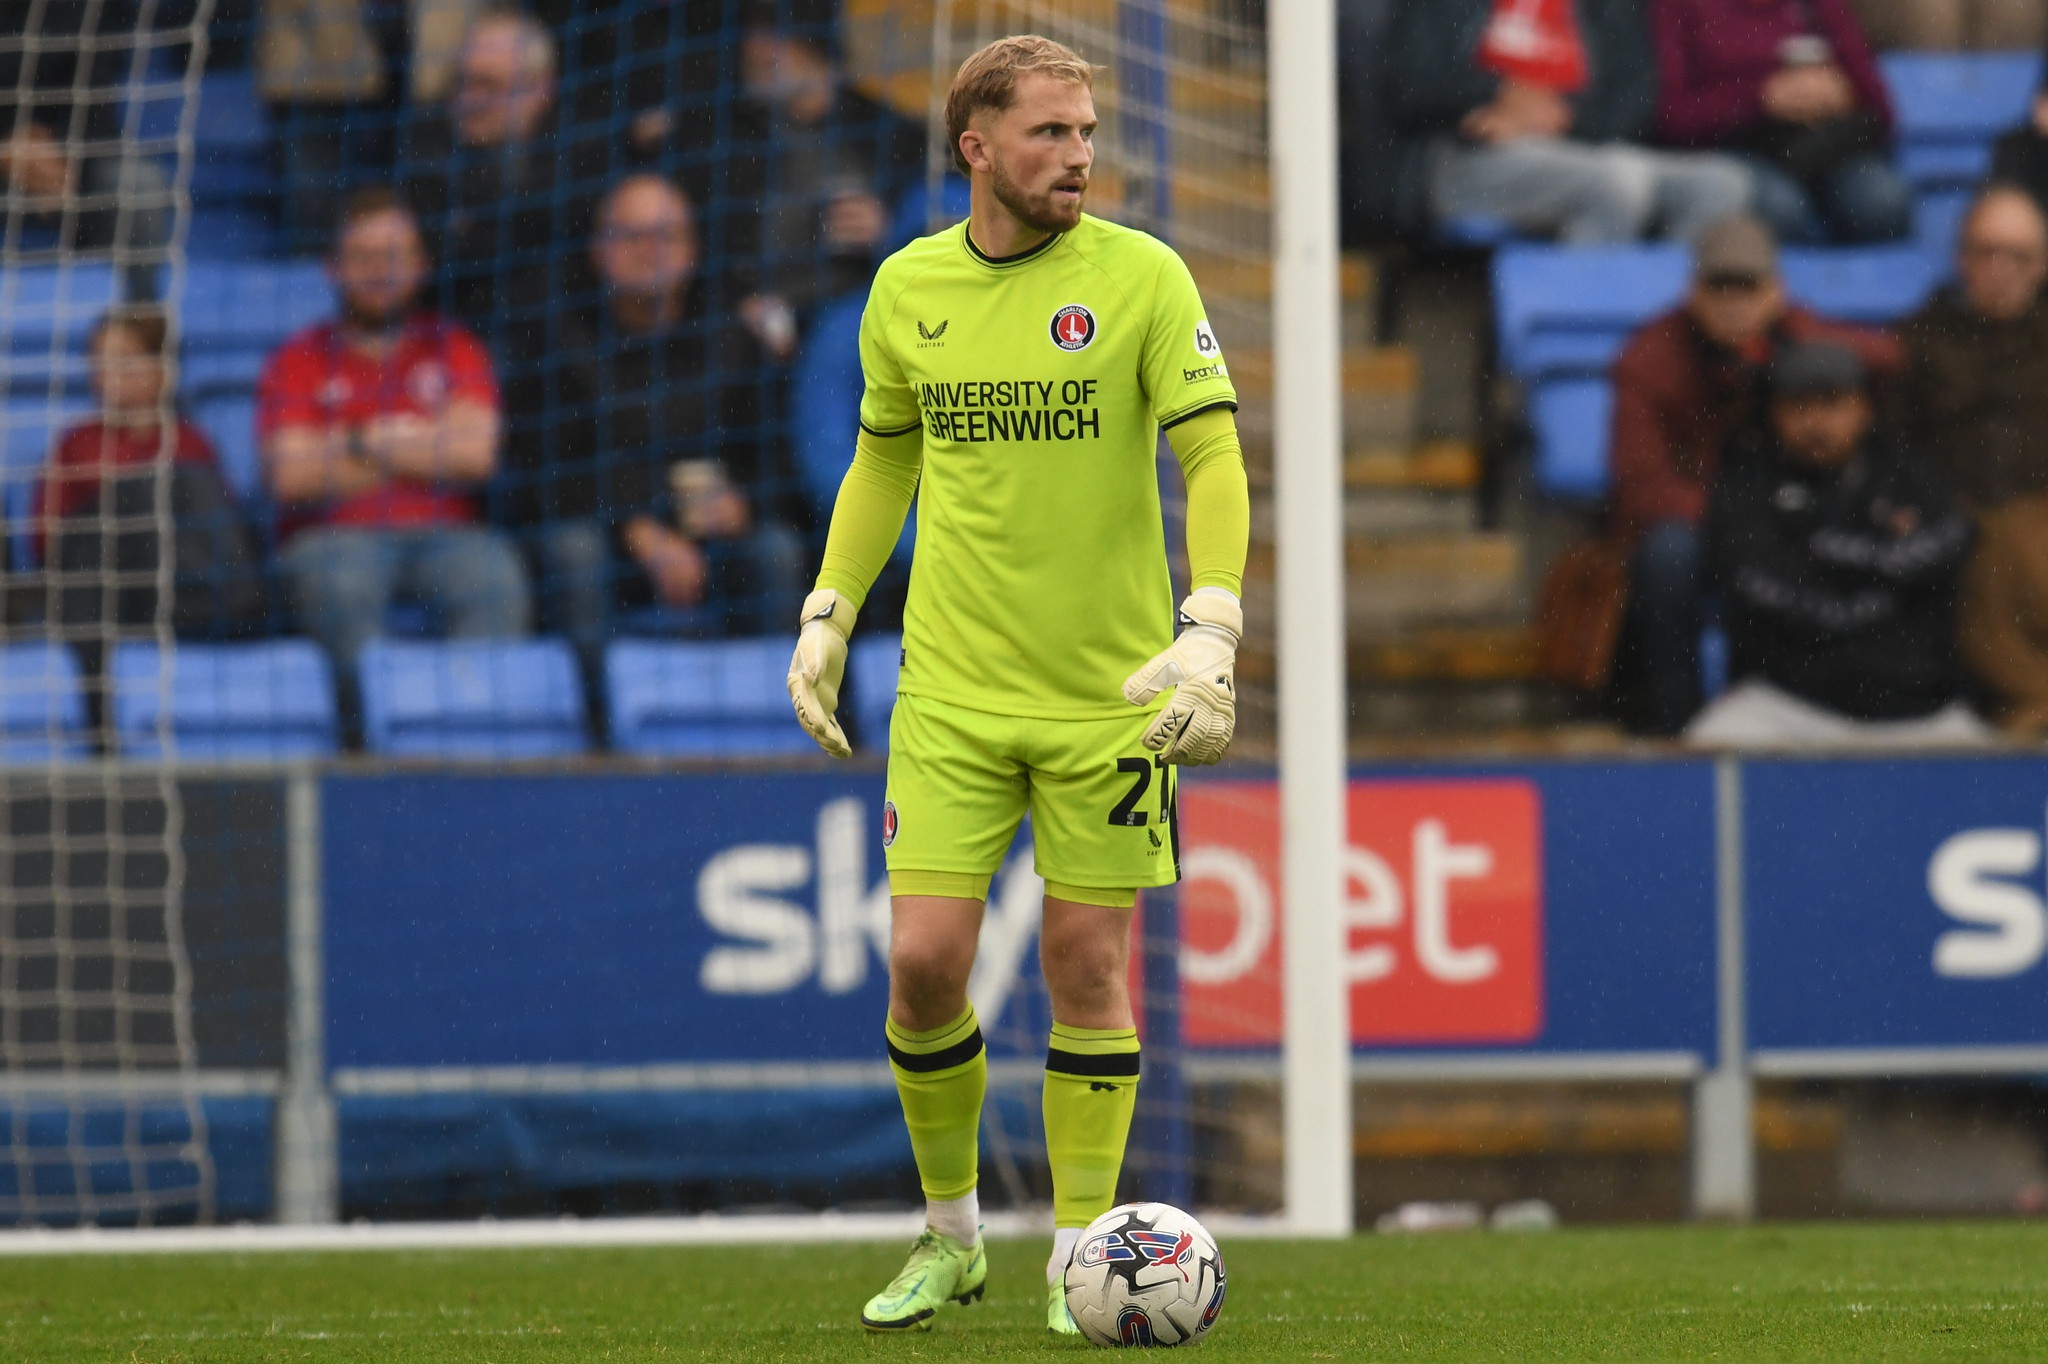 Charlton goalkeeper Harry Isted: You can find yourself in a rut where every  shot goes in so I'm pleased to have made some important saves at Shrewsbury  – South London News